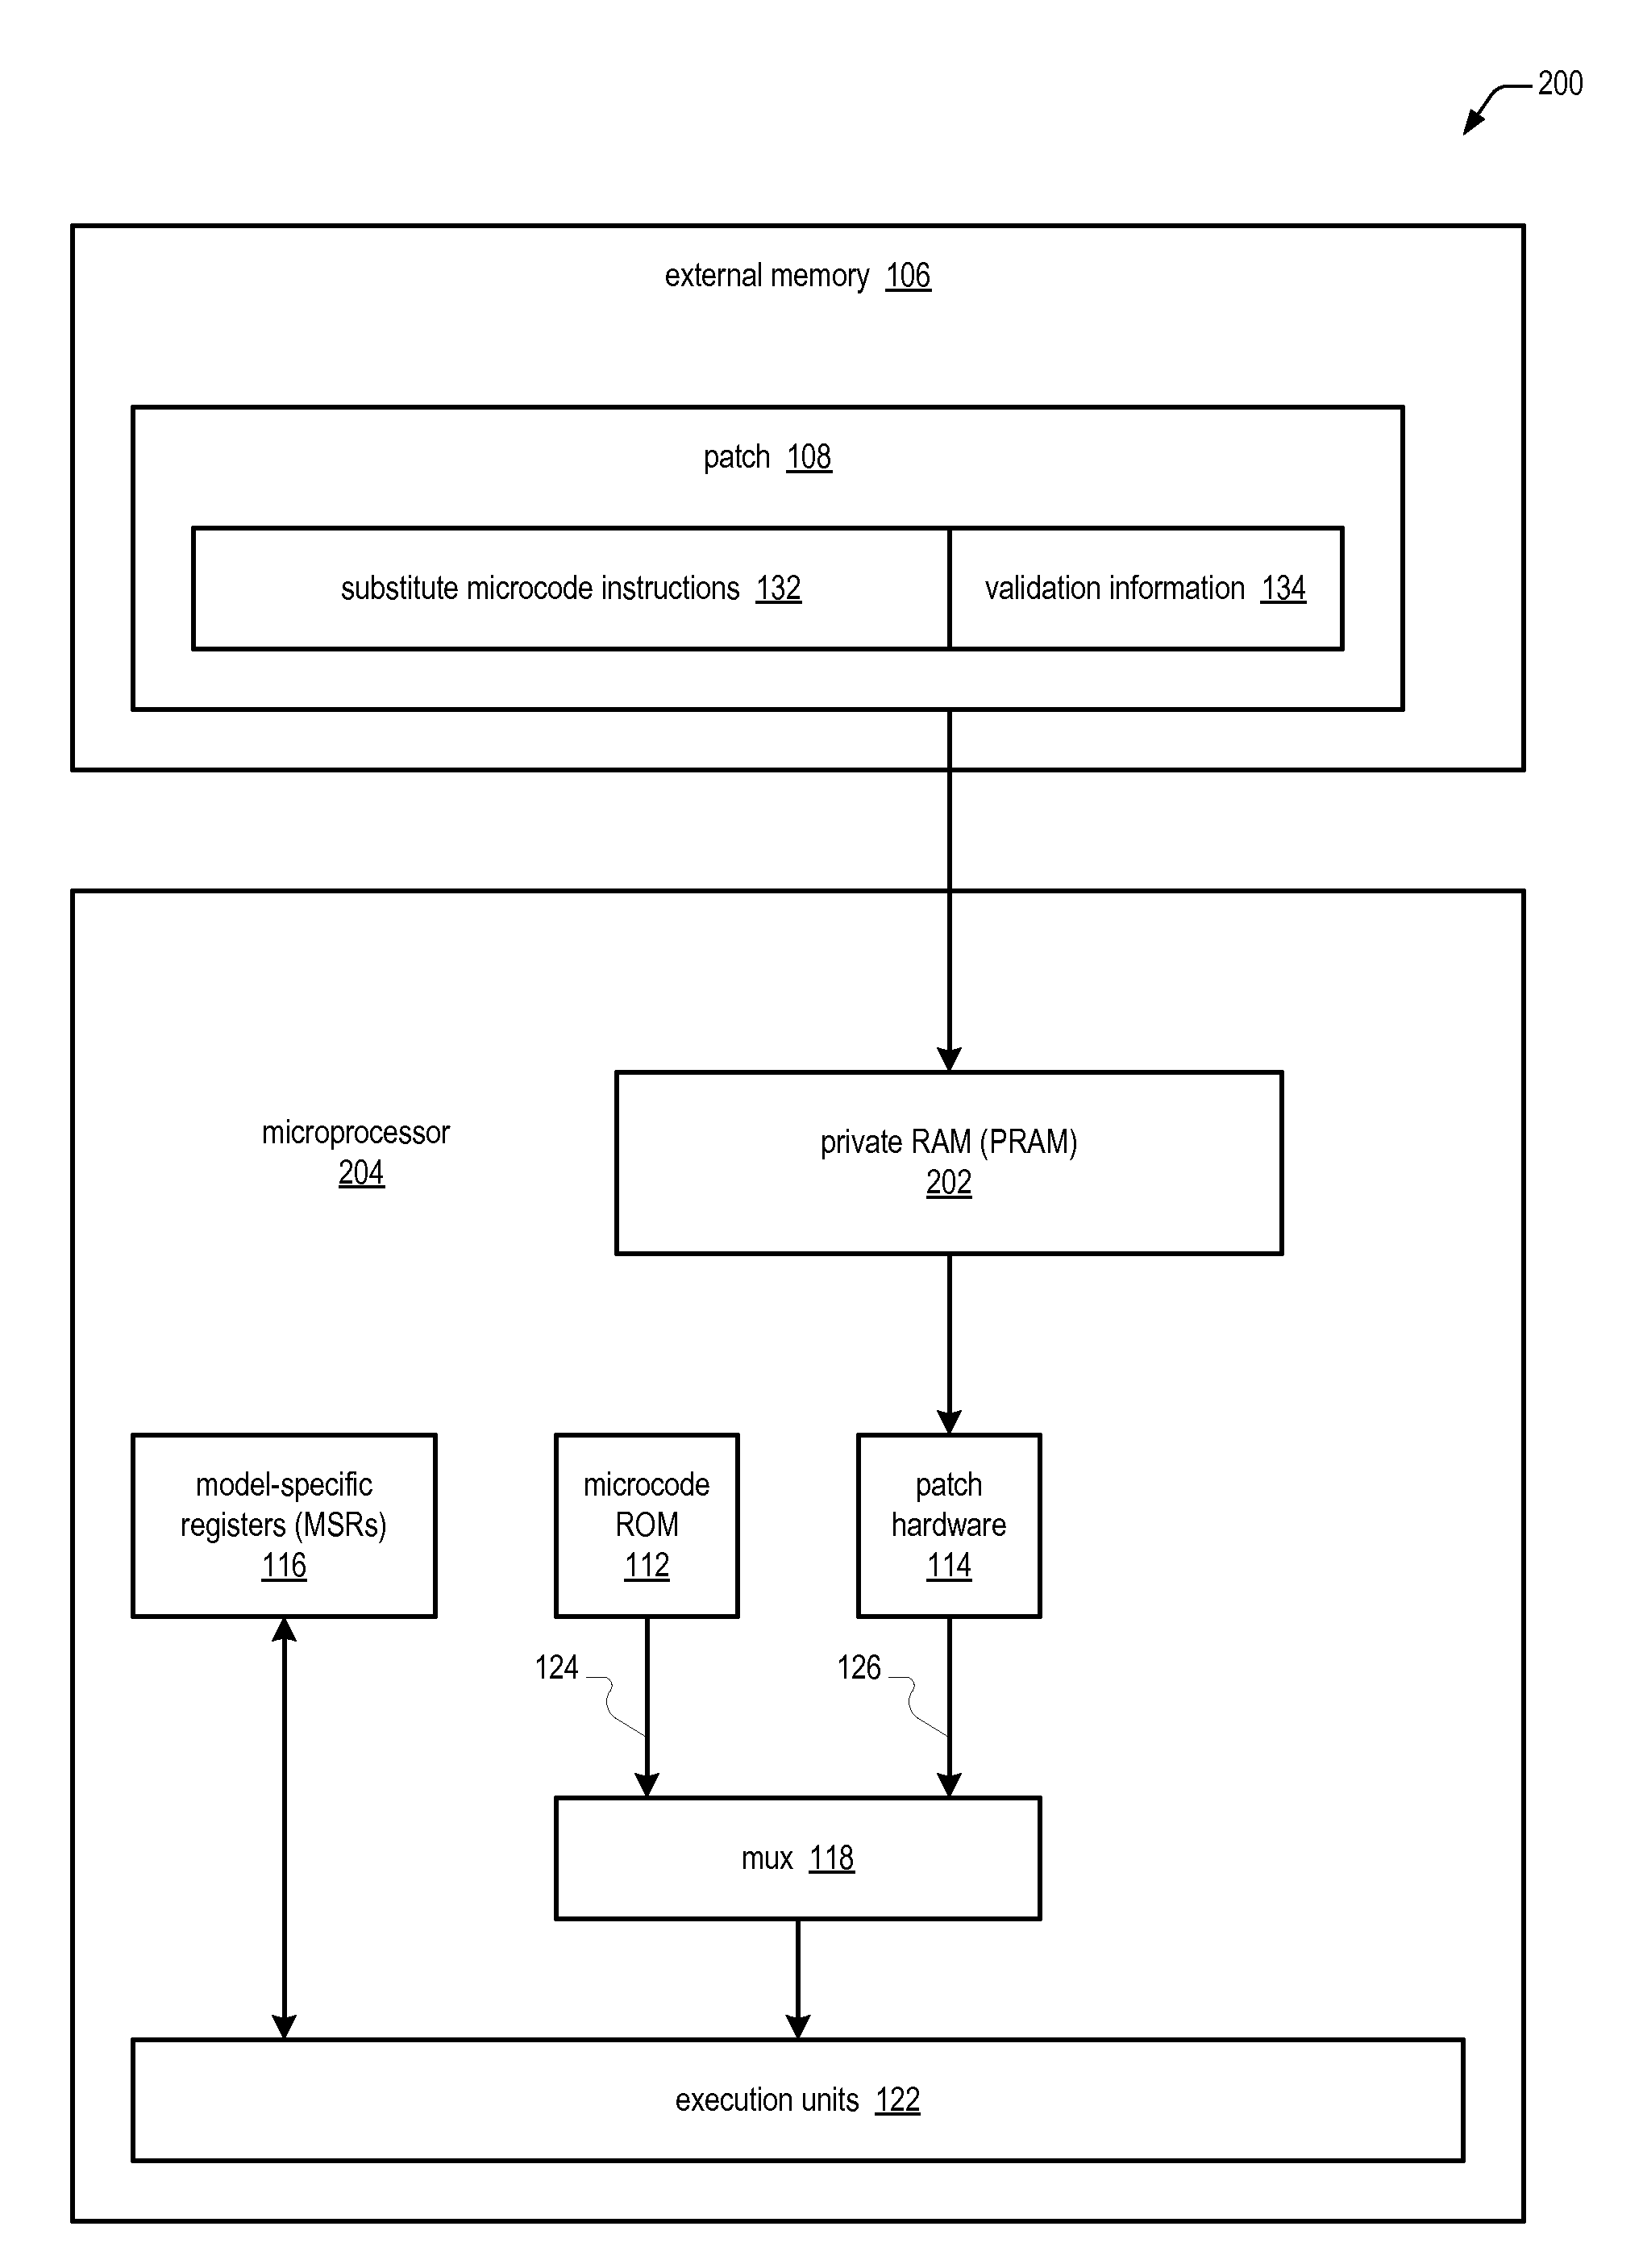 Apparatus and method for patching microcode in a microprocessor using private ram of the microprocessor